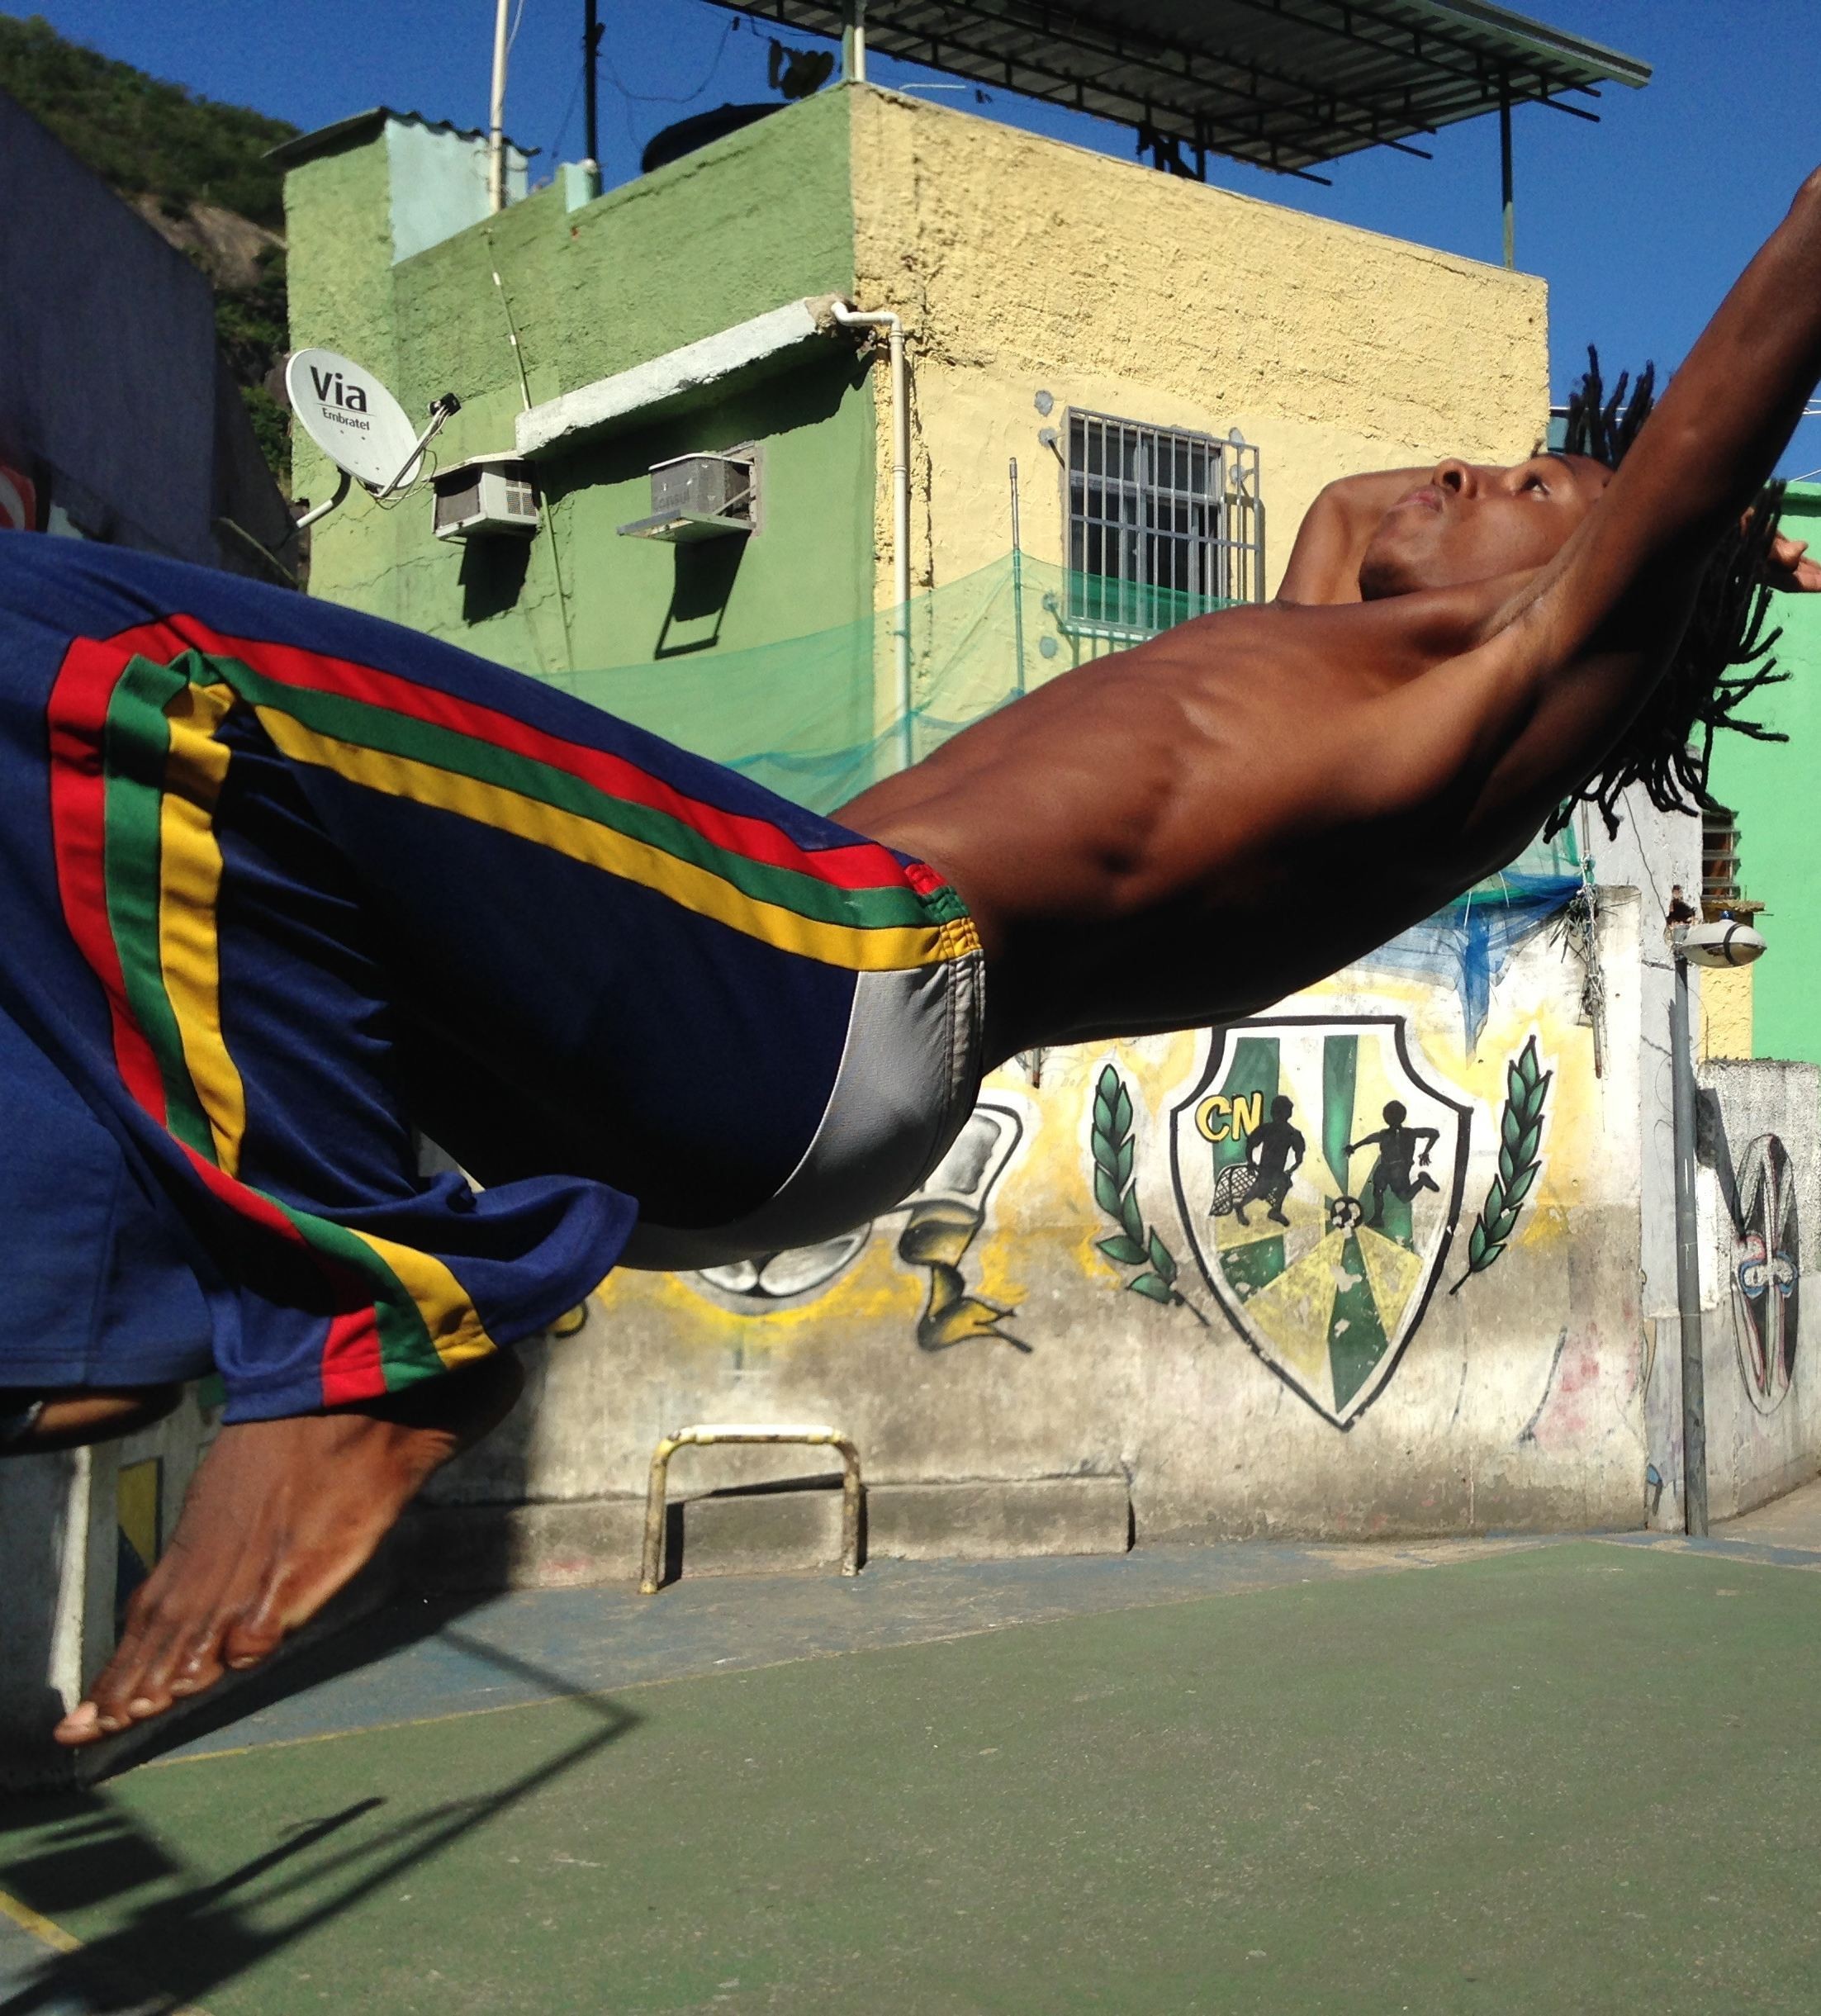 Paraisópolis, Brazil. A city of favelas aiming to be egalitarian, sustainable and accessible